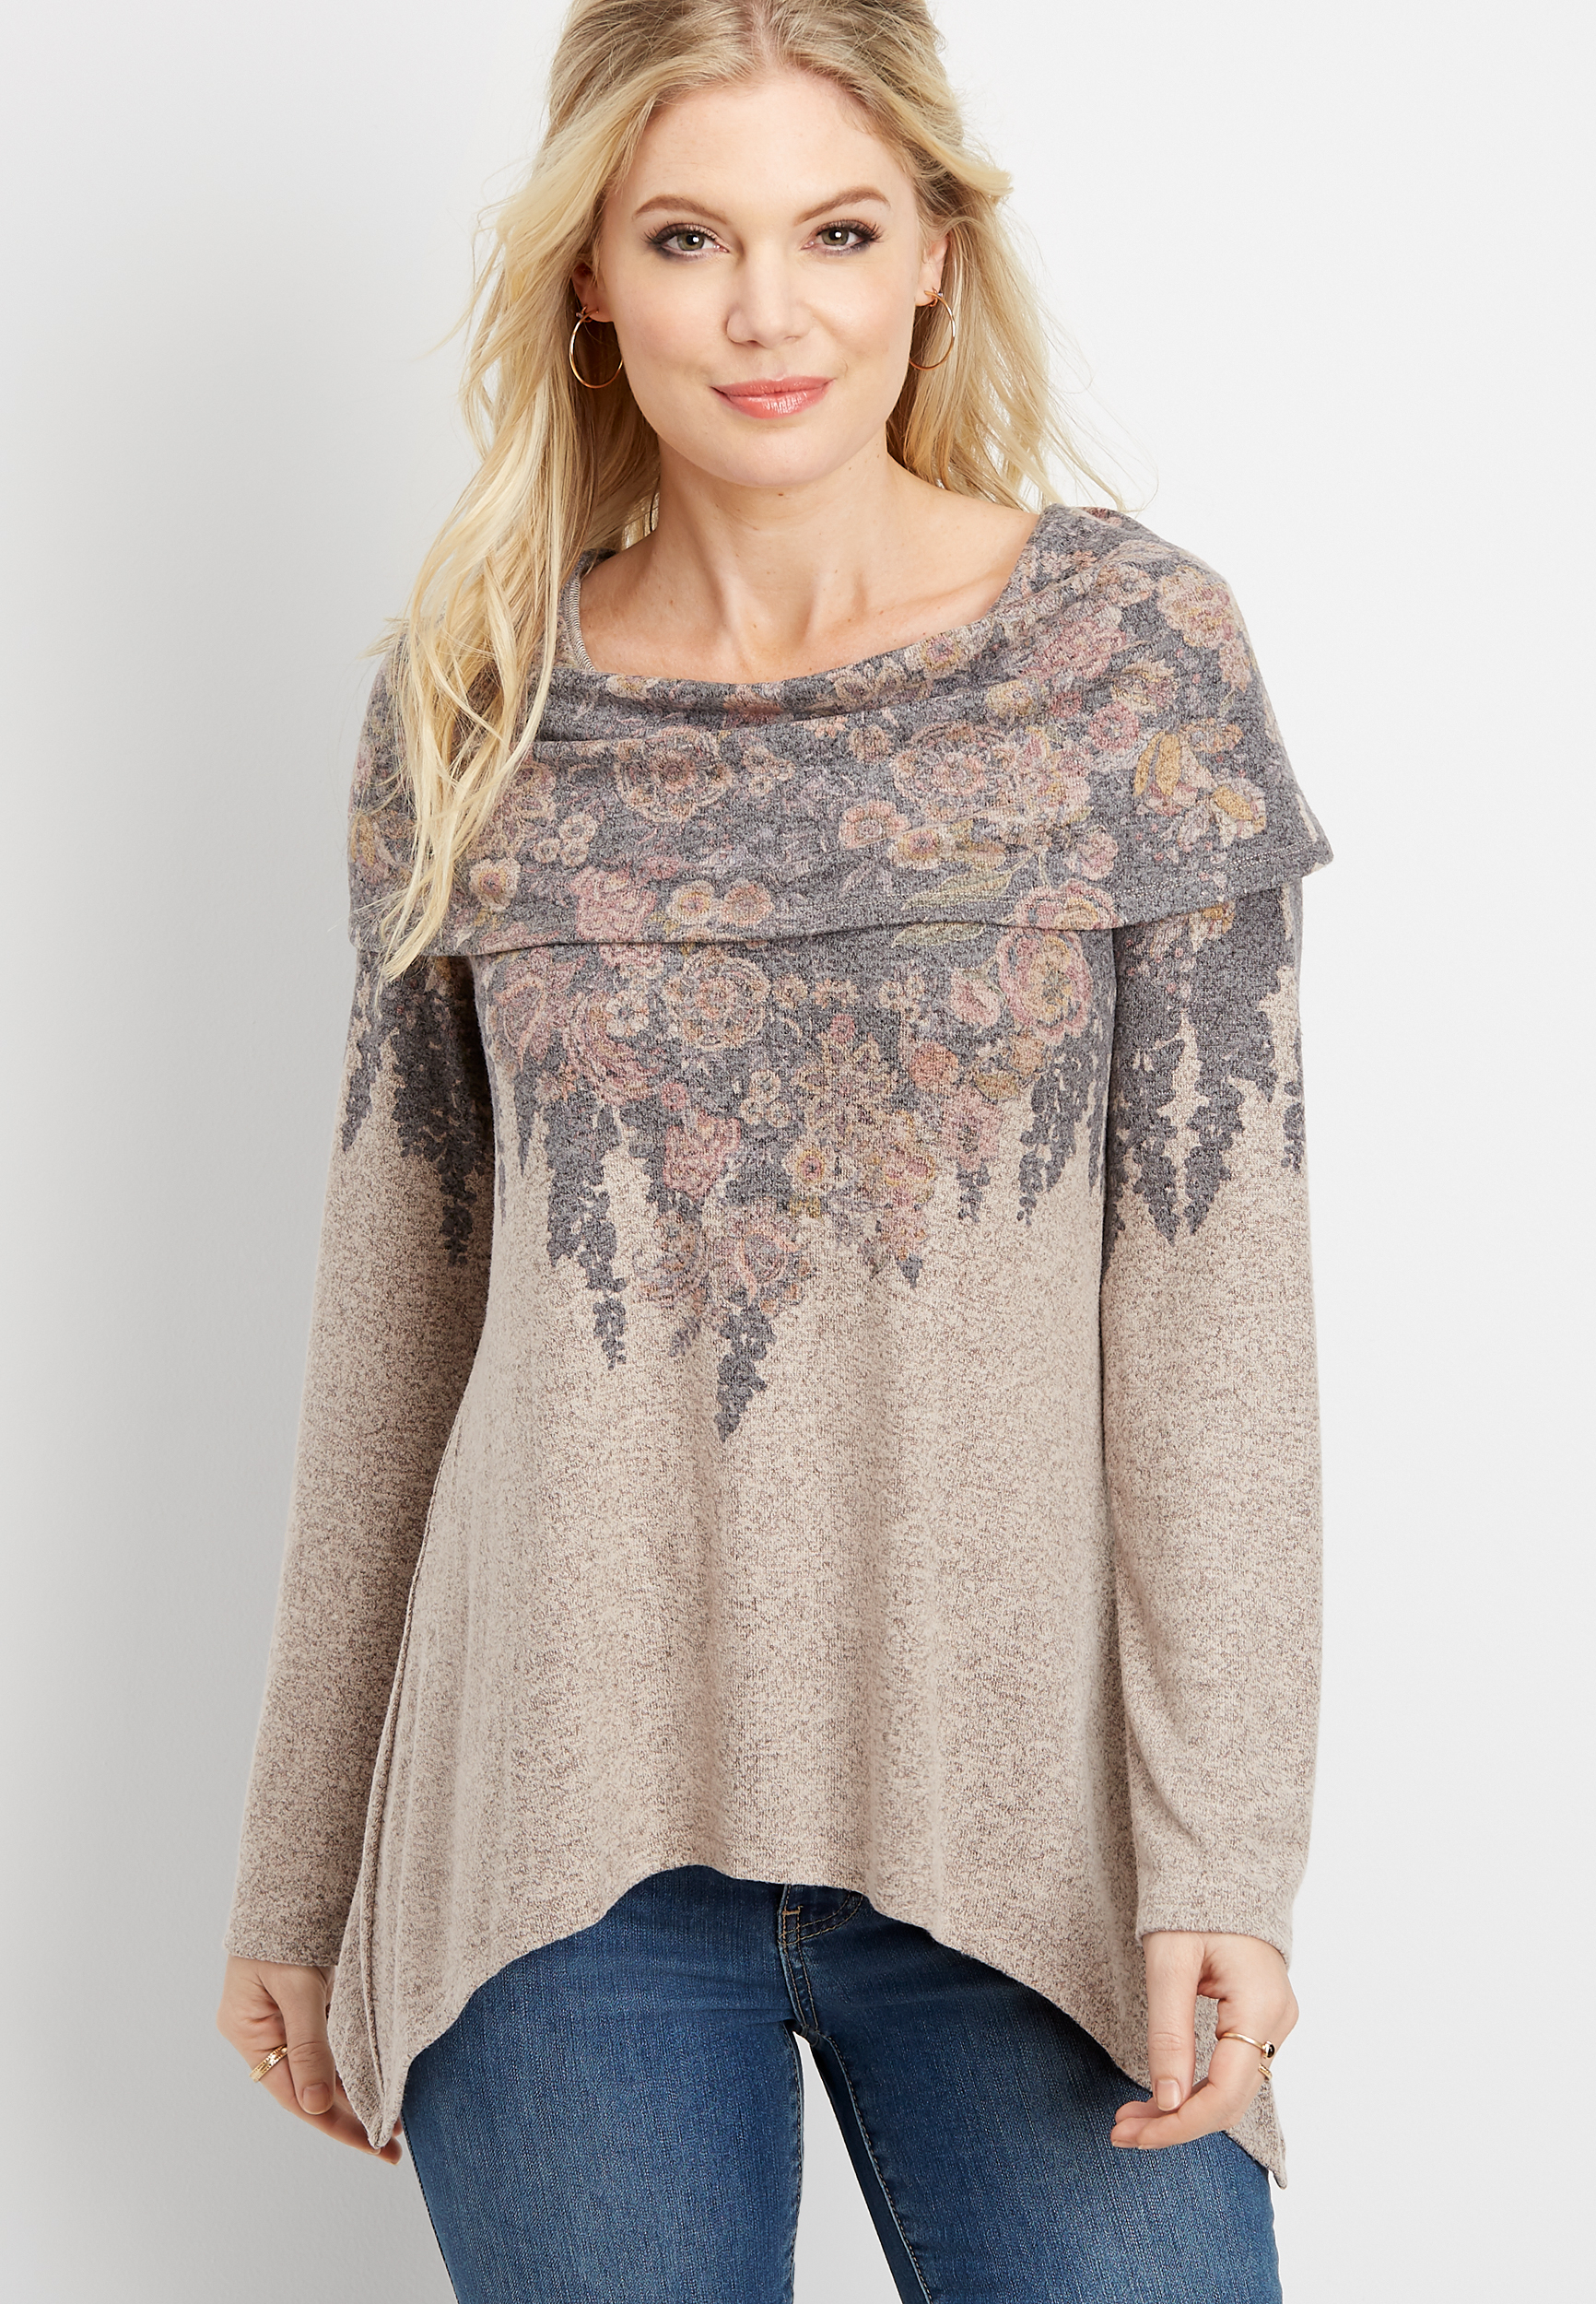 floral cowl neck tunic top